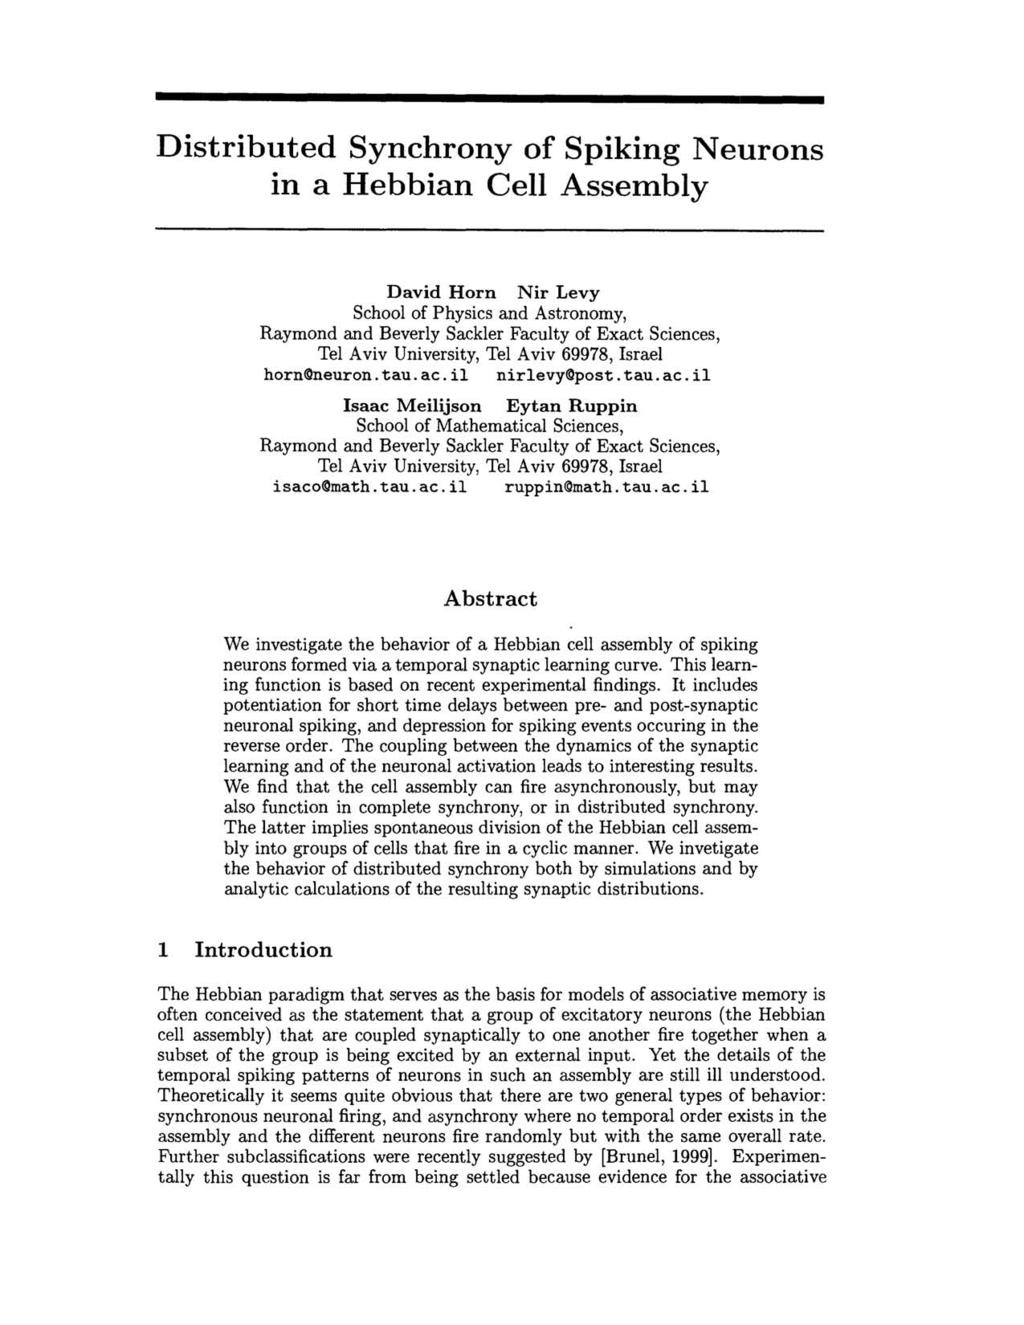 Distributed Synchrony of Spiking Neurons in a Hebbian Cell Assembly David Horn Nir Levy School of Physics and Astronomy, Raymond and Beverly Sackler Faculty of Exact Sciences, Tel Aviv University,